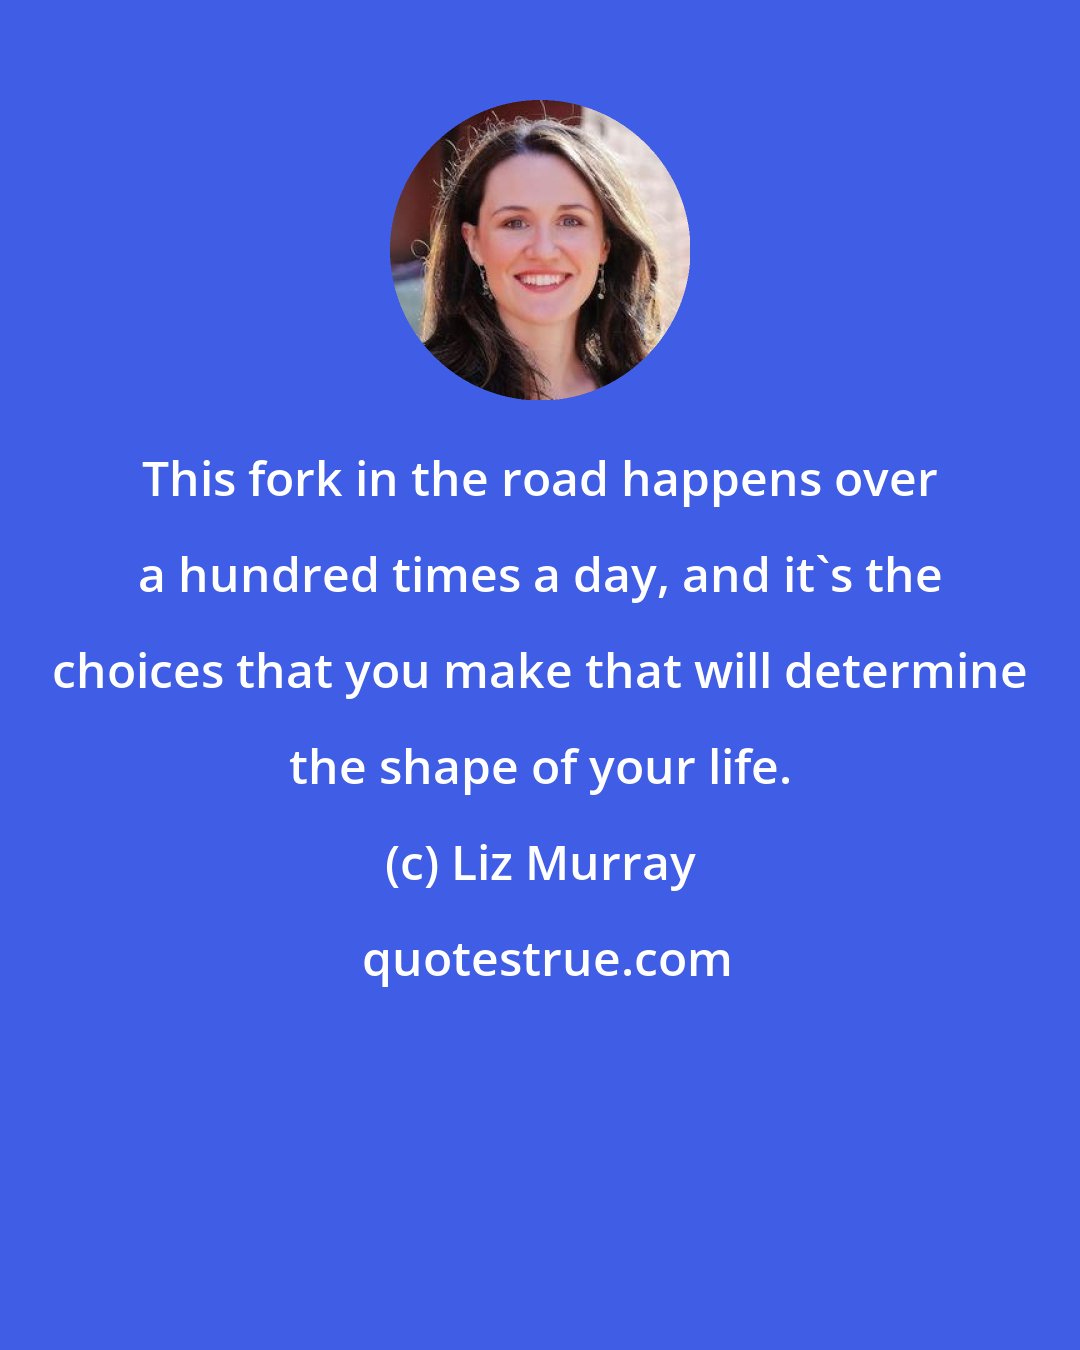 Liz Murray: This fork in the road happens over a hundred times a day, and it's the choices that you make that will determine the shape of your life.